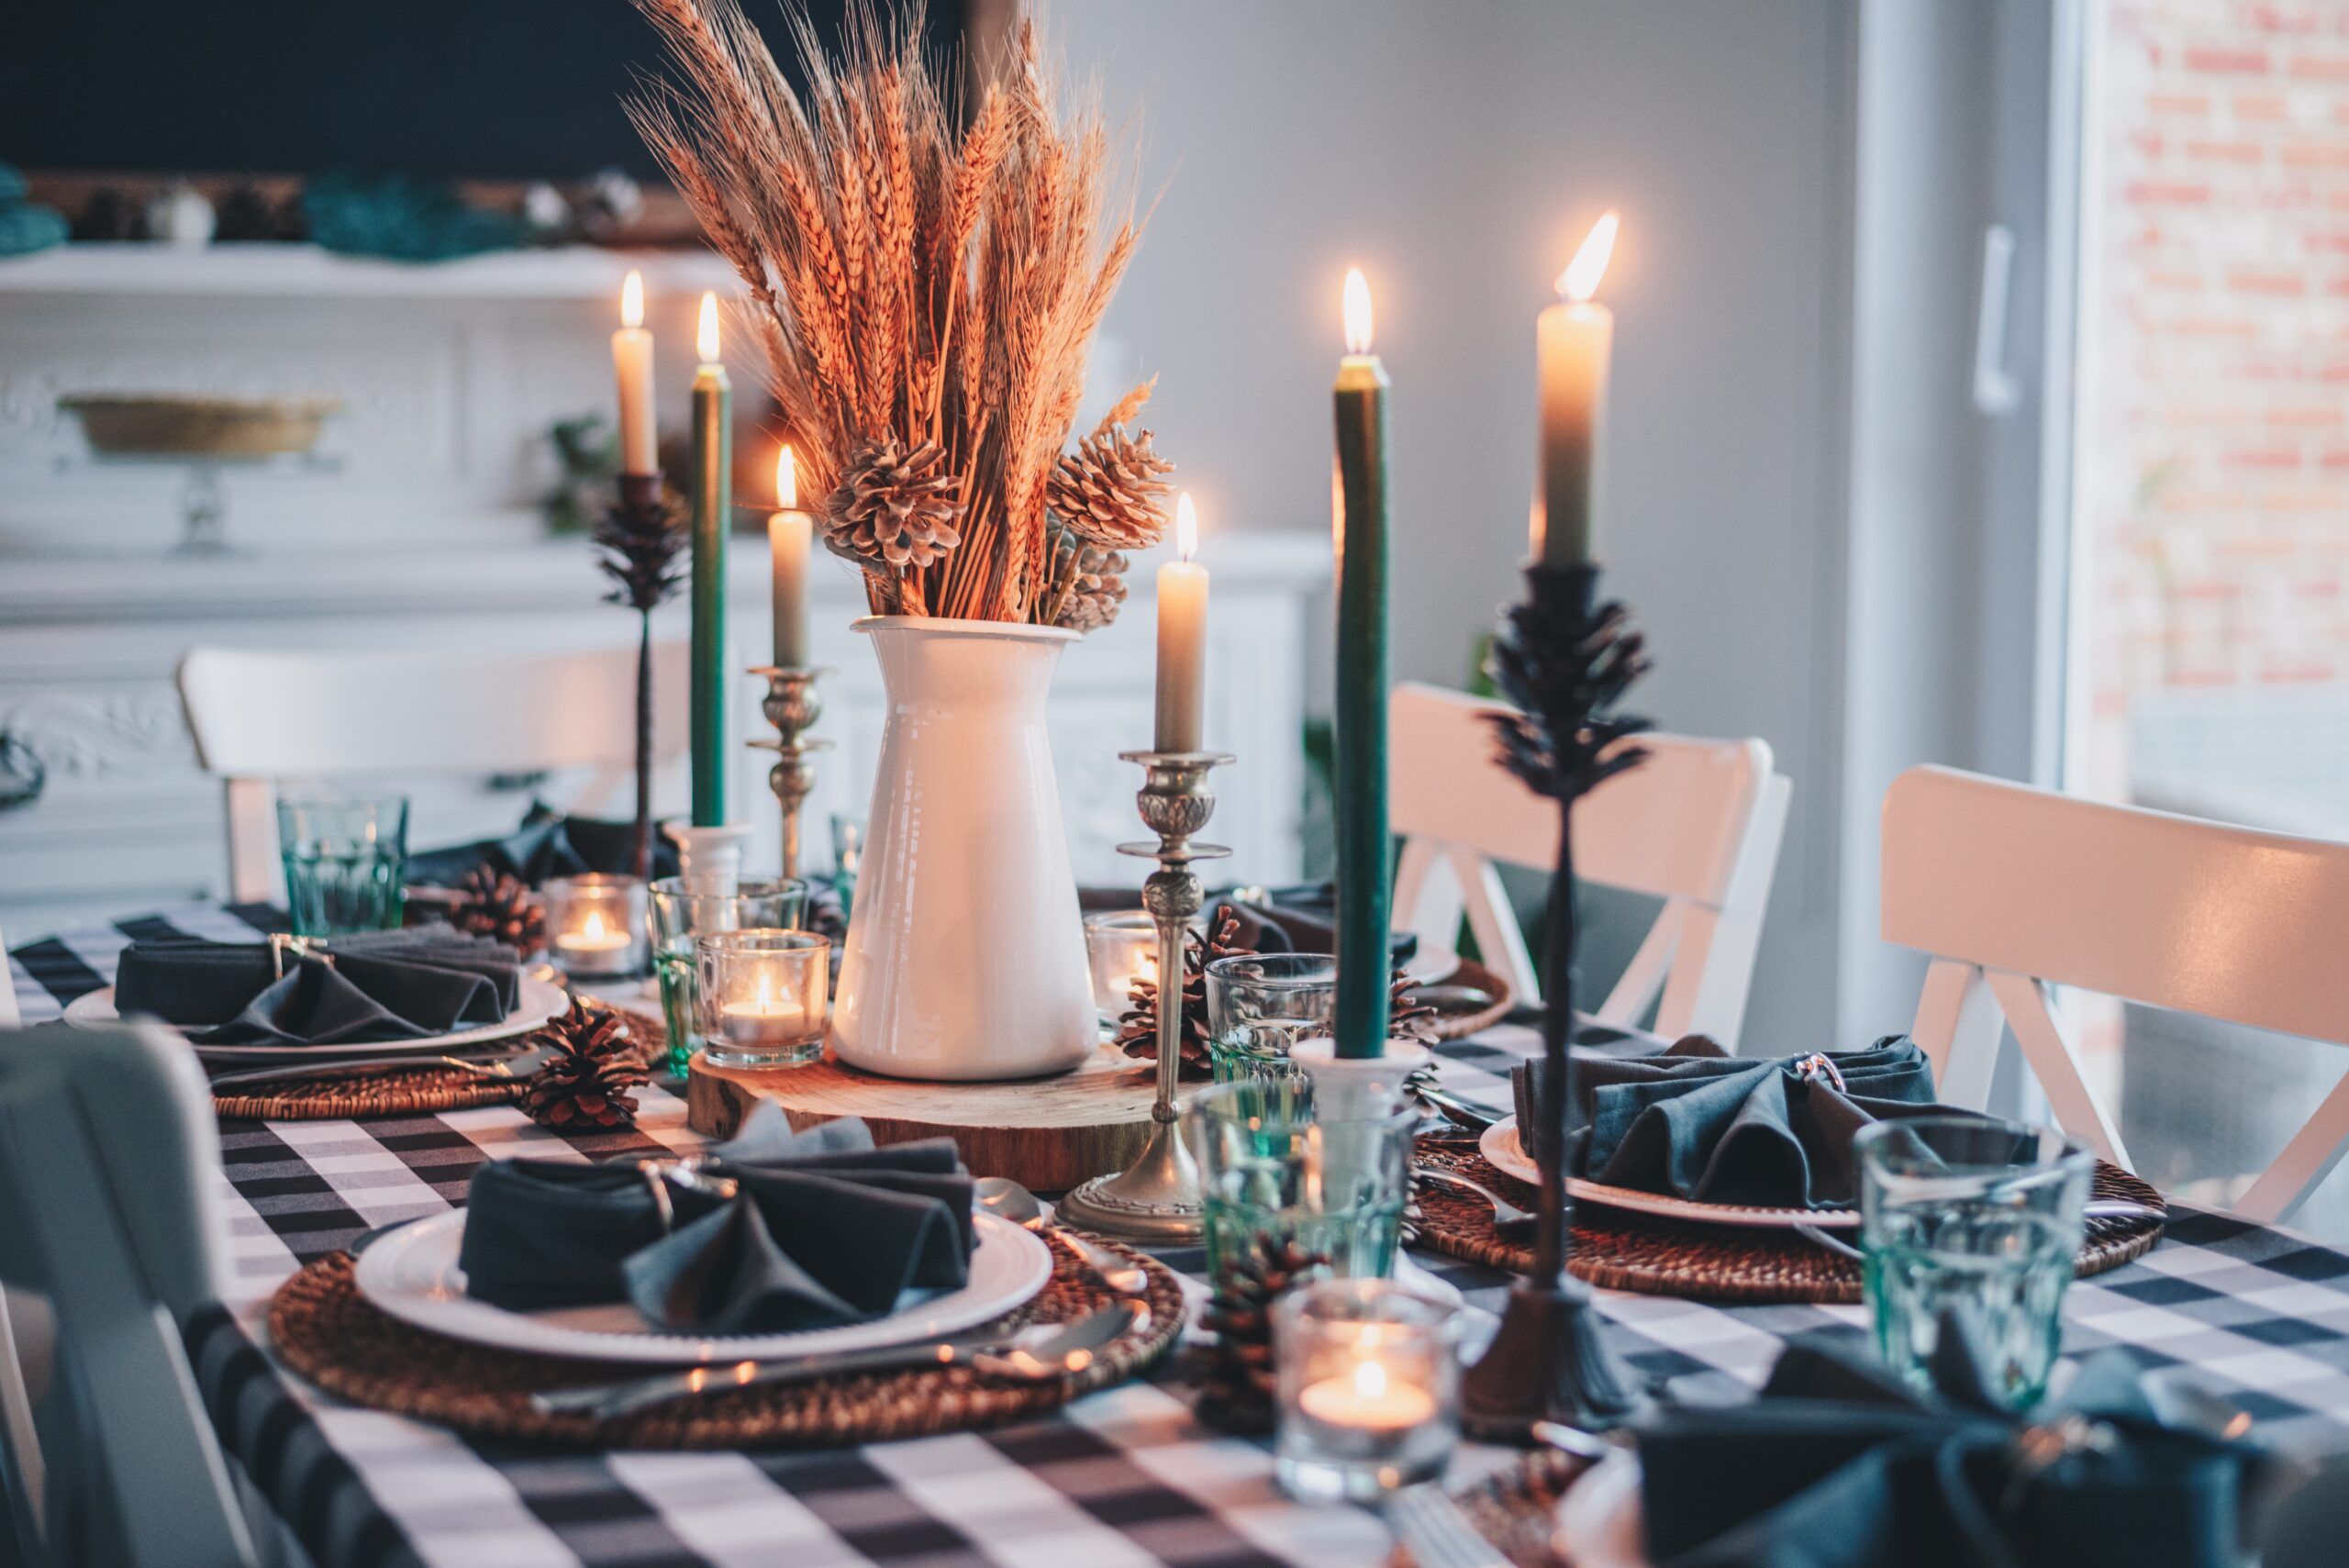 Thanksgiving is my favorite holiday of the year. The coziness of the candles, people gathered around the table, pumpkin pie. Those are the moment that we wish could last forever. There's so much to be grateful for!